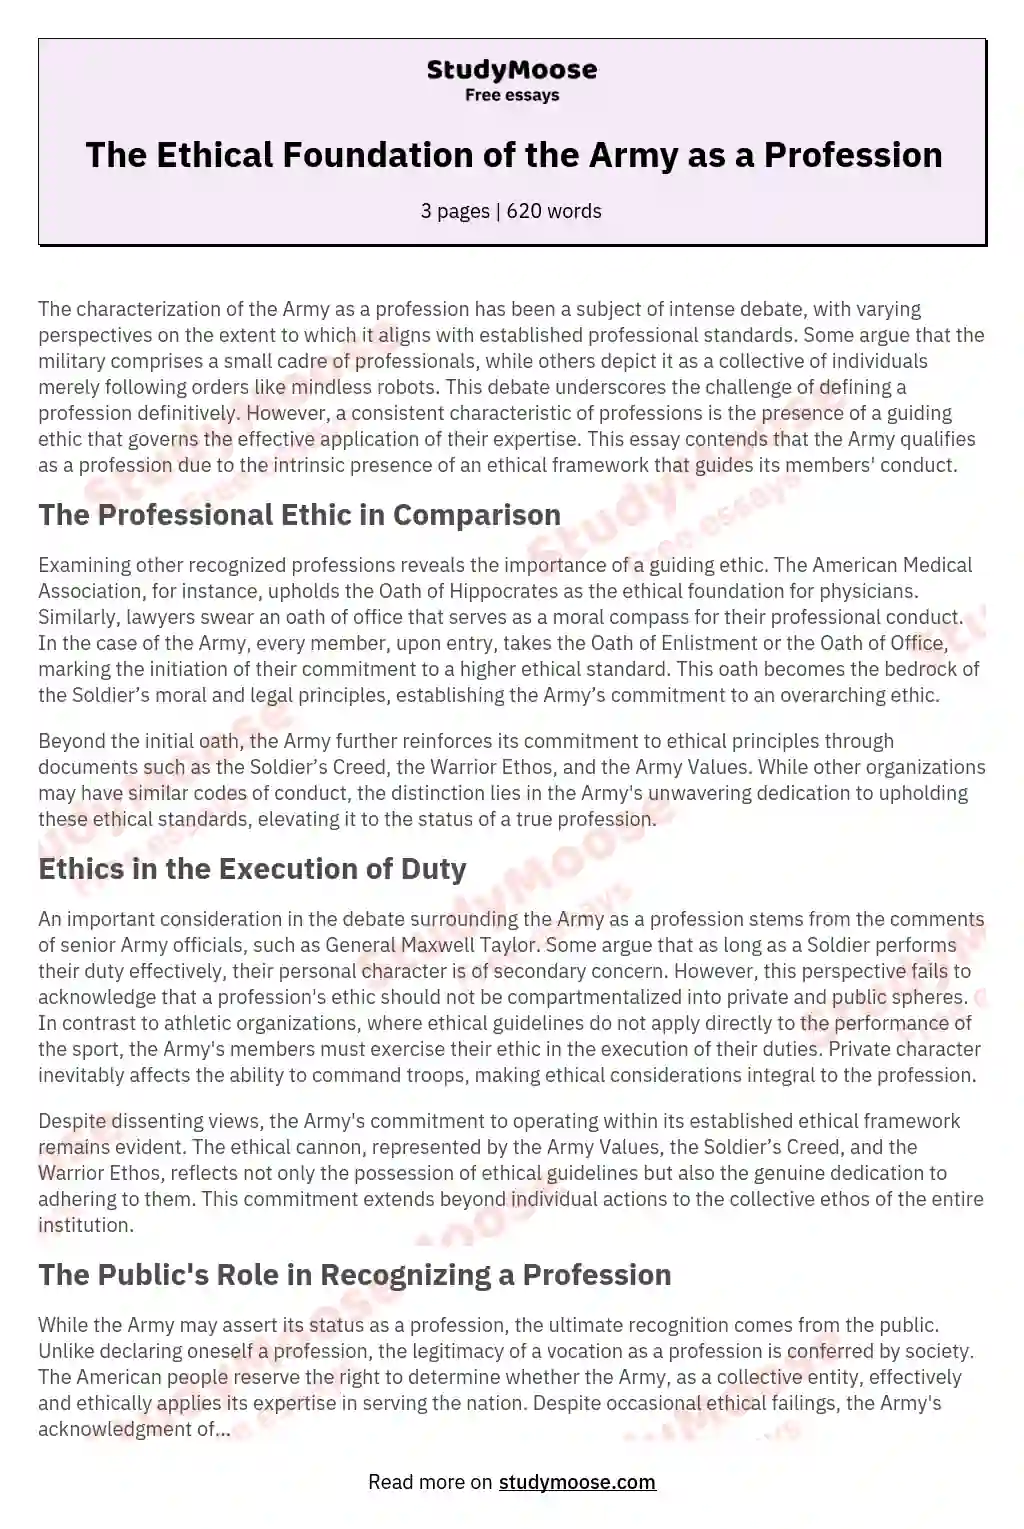 The Ethical Foundation of the Army as a Profession essay